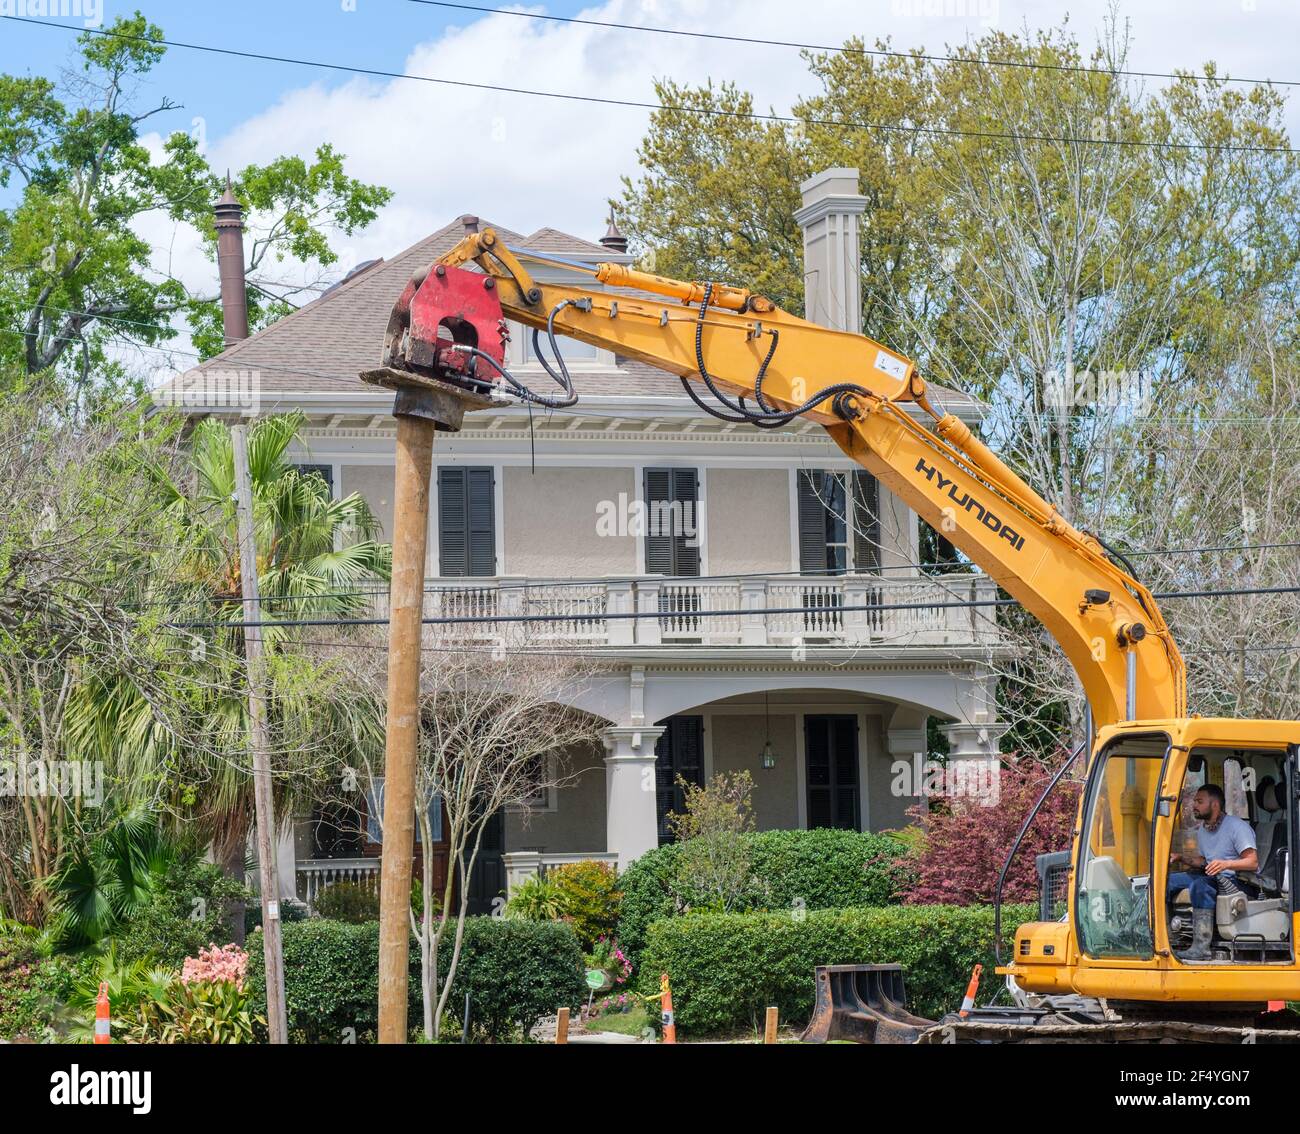 NEW ORLEANS, LA, USA - MARCH 22, 2021: Man operating pile driver for new construction in Uptown neighborhood Stock Photo